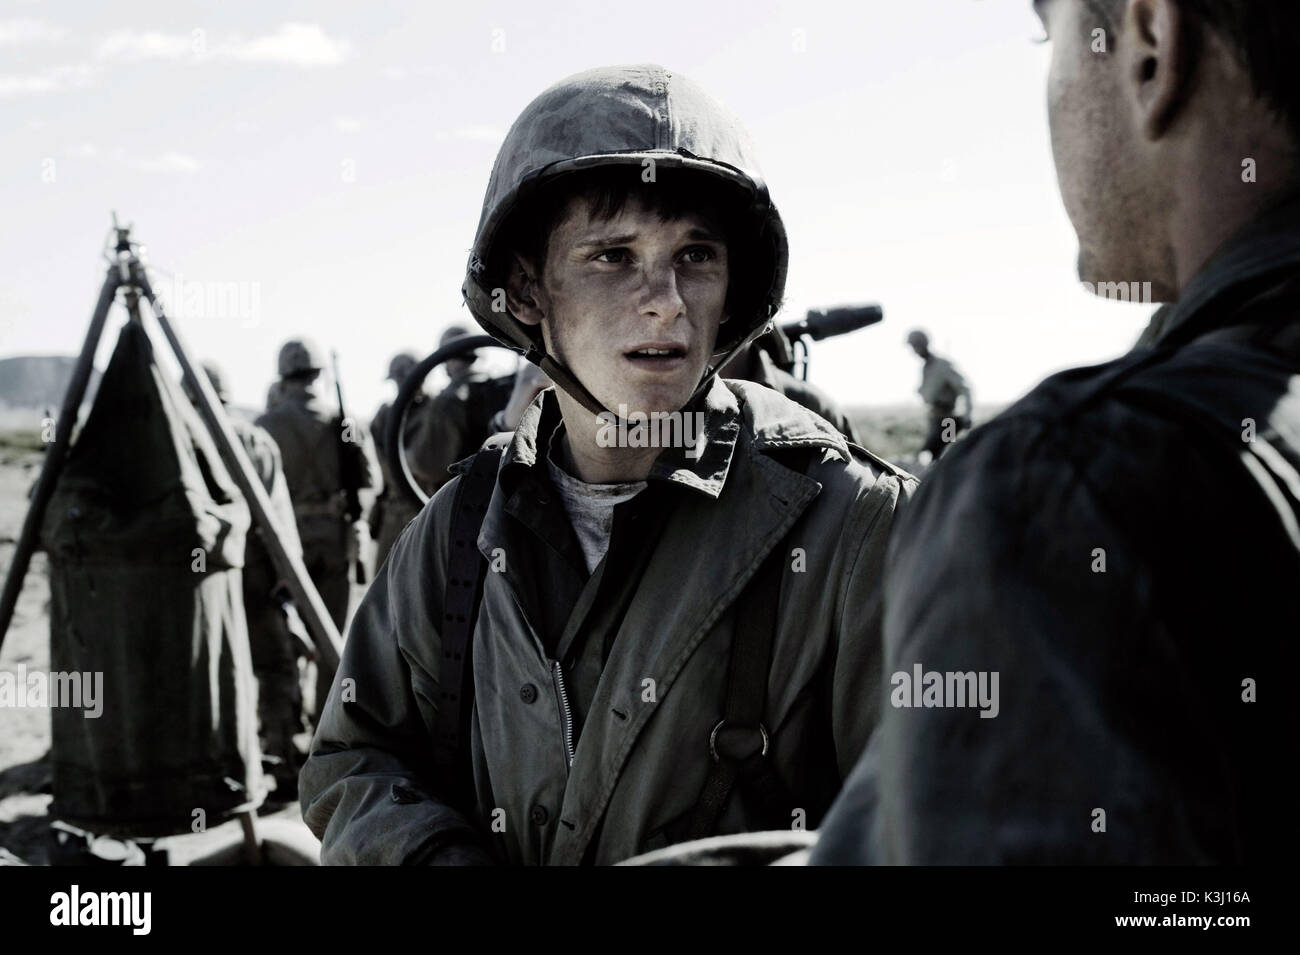 Ralph Iggy Ignatowski (JAMIE BELL) in Paramount Pictures e Warner Bros. Pictures' World War II drama FLAGS OF OUR FATHERS, diretto da Clint Eastwood. BANDIERE DEI NOSTRI PADRI [US 2006] JAMIE BELL nel ruolo di Ralph Iggy Ignatowski Ralph Iggy Ignatowski (JAMIE BELL) in Paramount Pictures e Warner Bros. Pictures' World War II drama FLAGS OF OUR FATHERS, diretto da Clint Eastwood. Data: 2006 Foto Stock